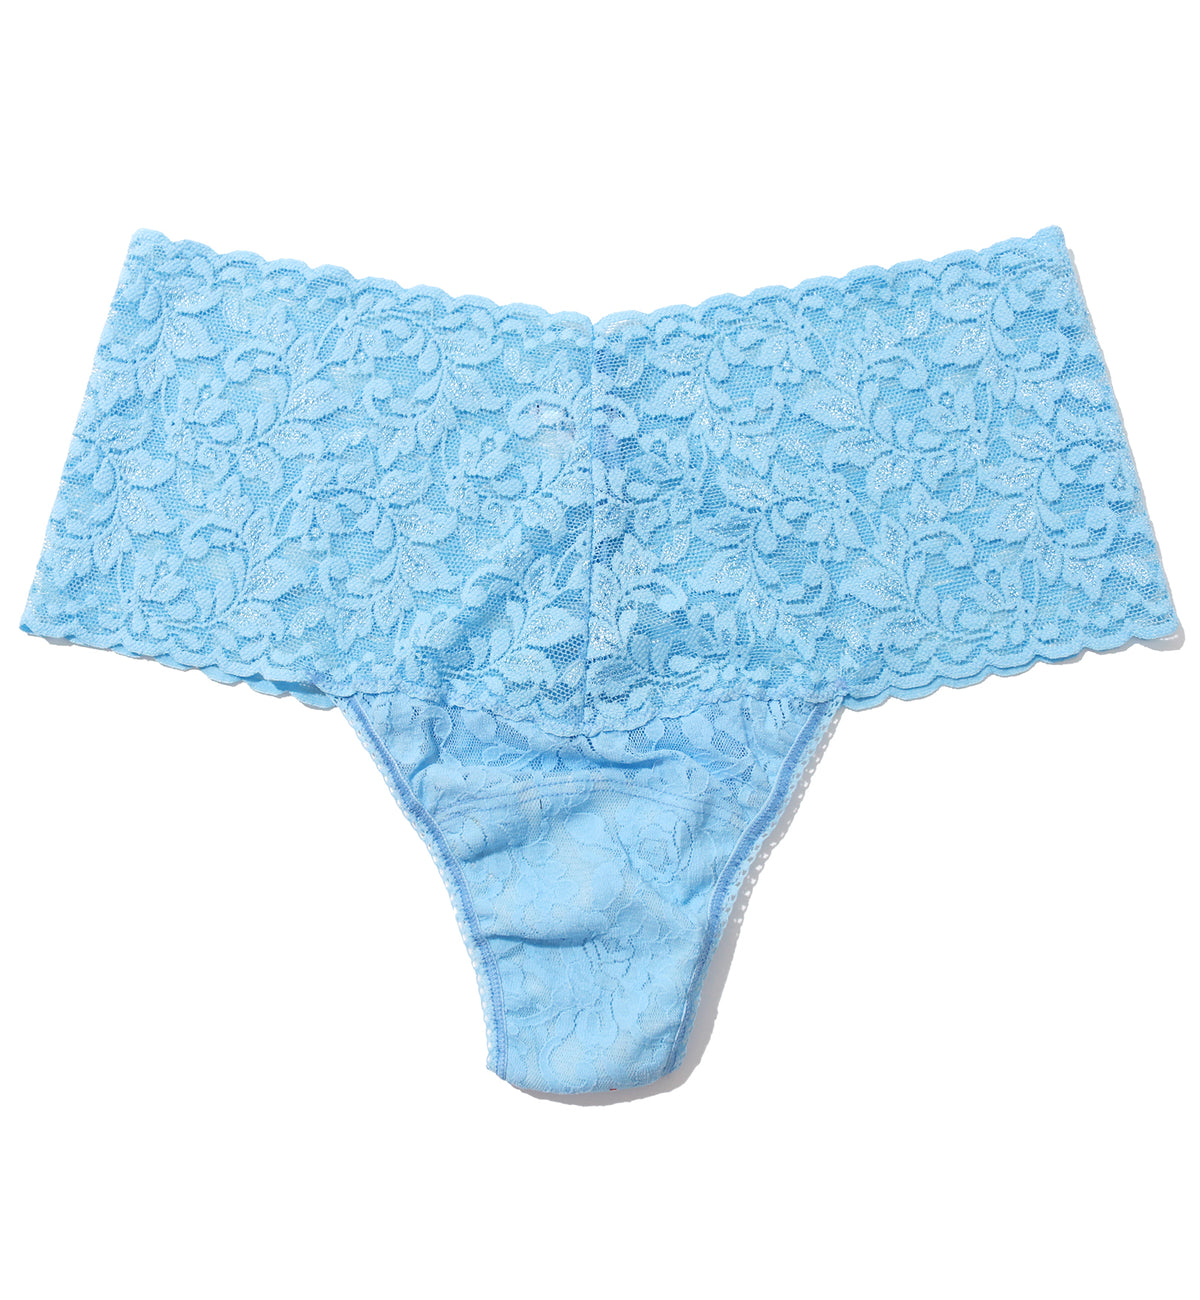 Hanky Panky Signature Lace Retro Thong (9K1926),Partly Cloudy - Partly Cloudy,One Size